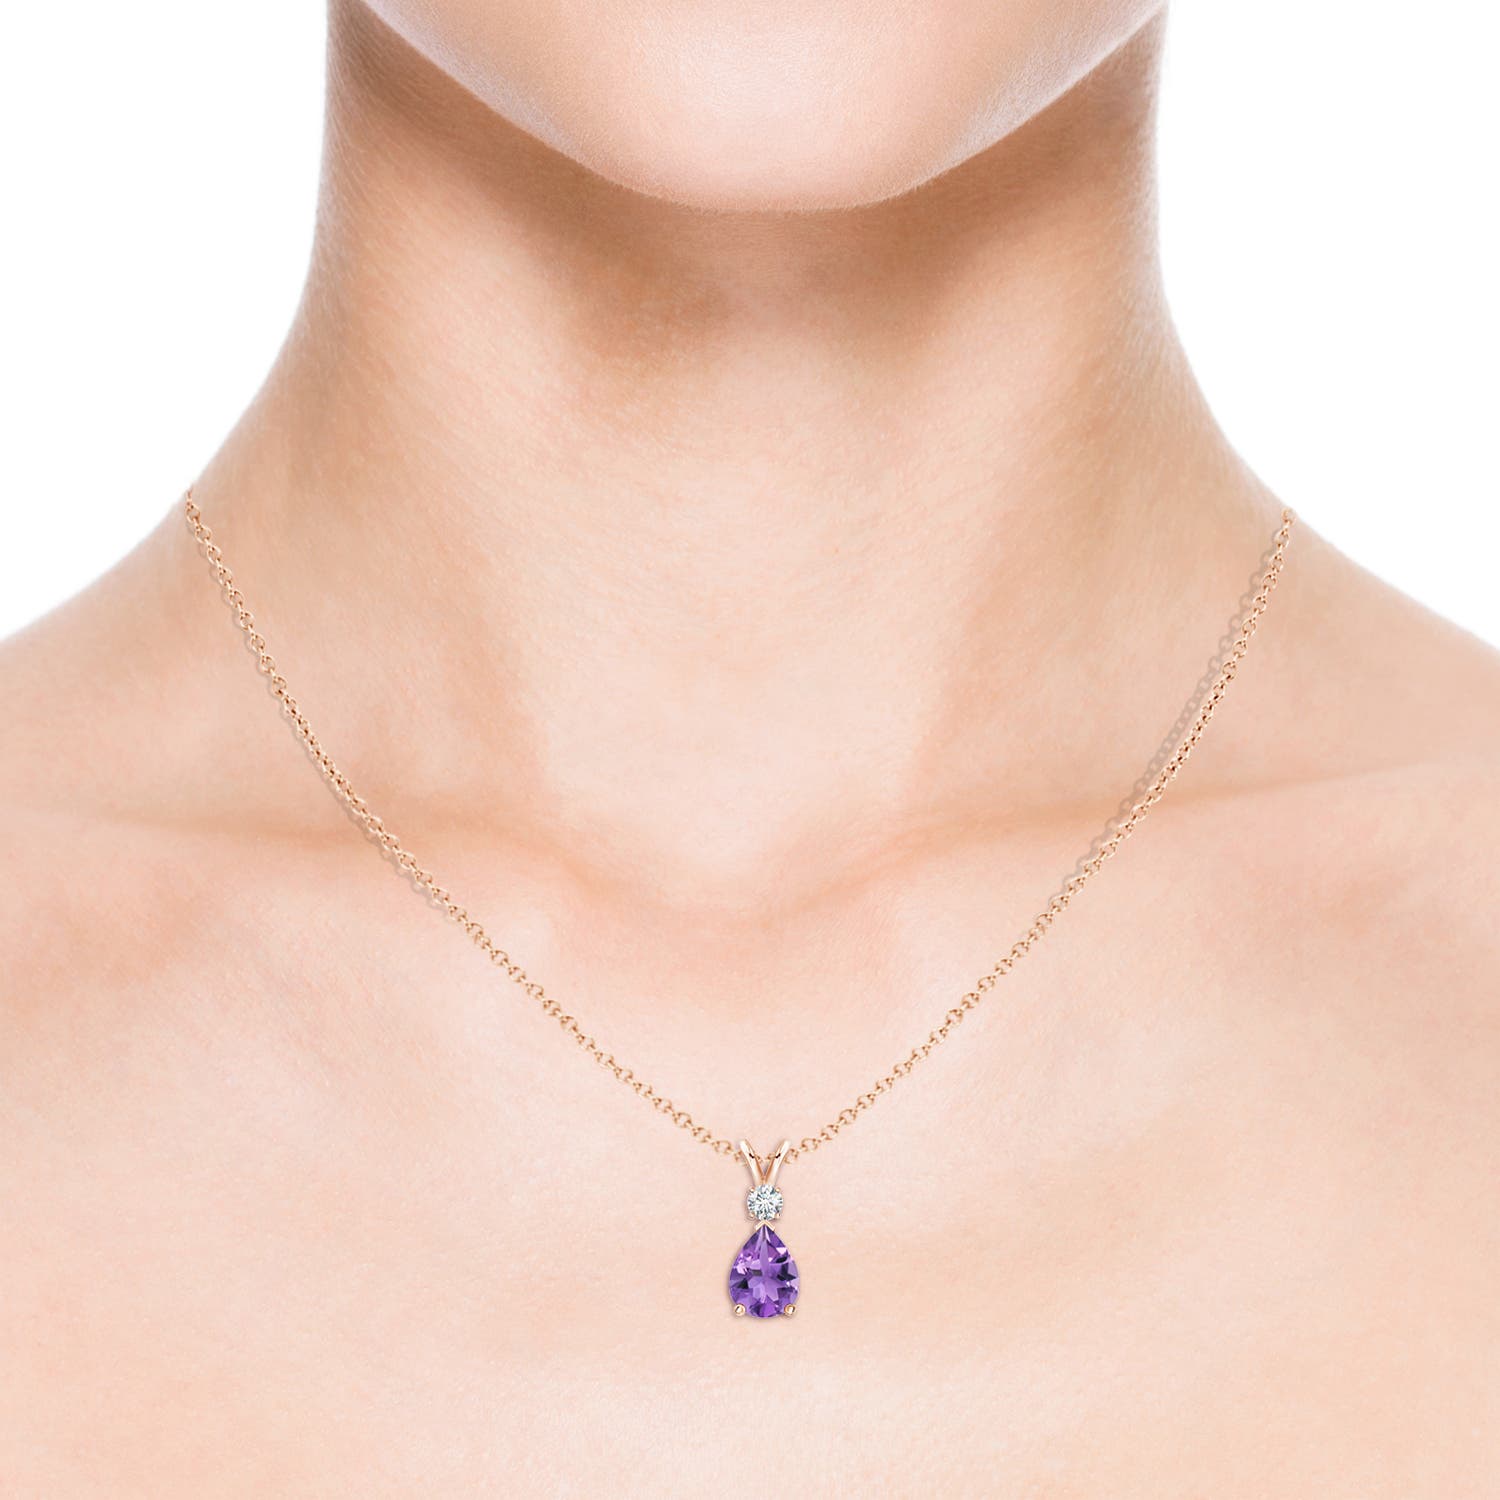 AA - Amethyst / 1.11 CT / 14 KT Rose Gold